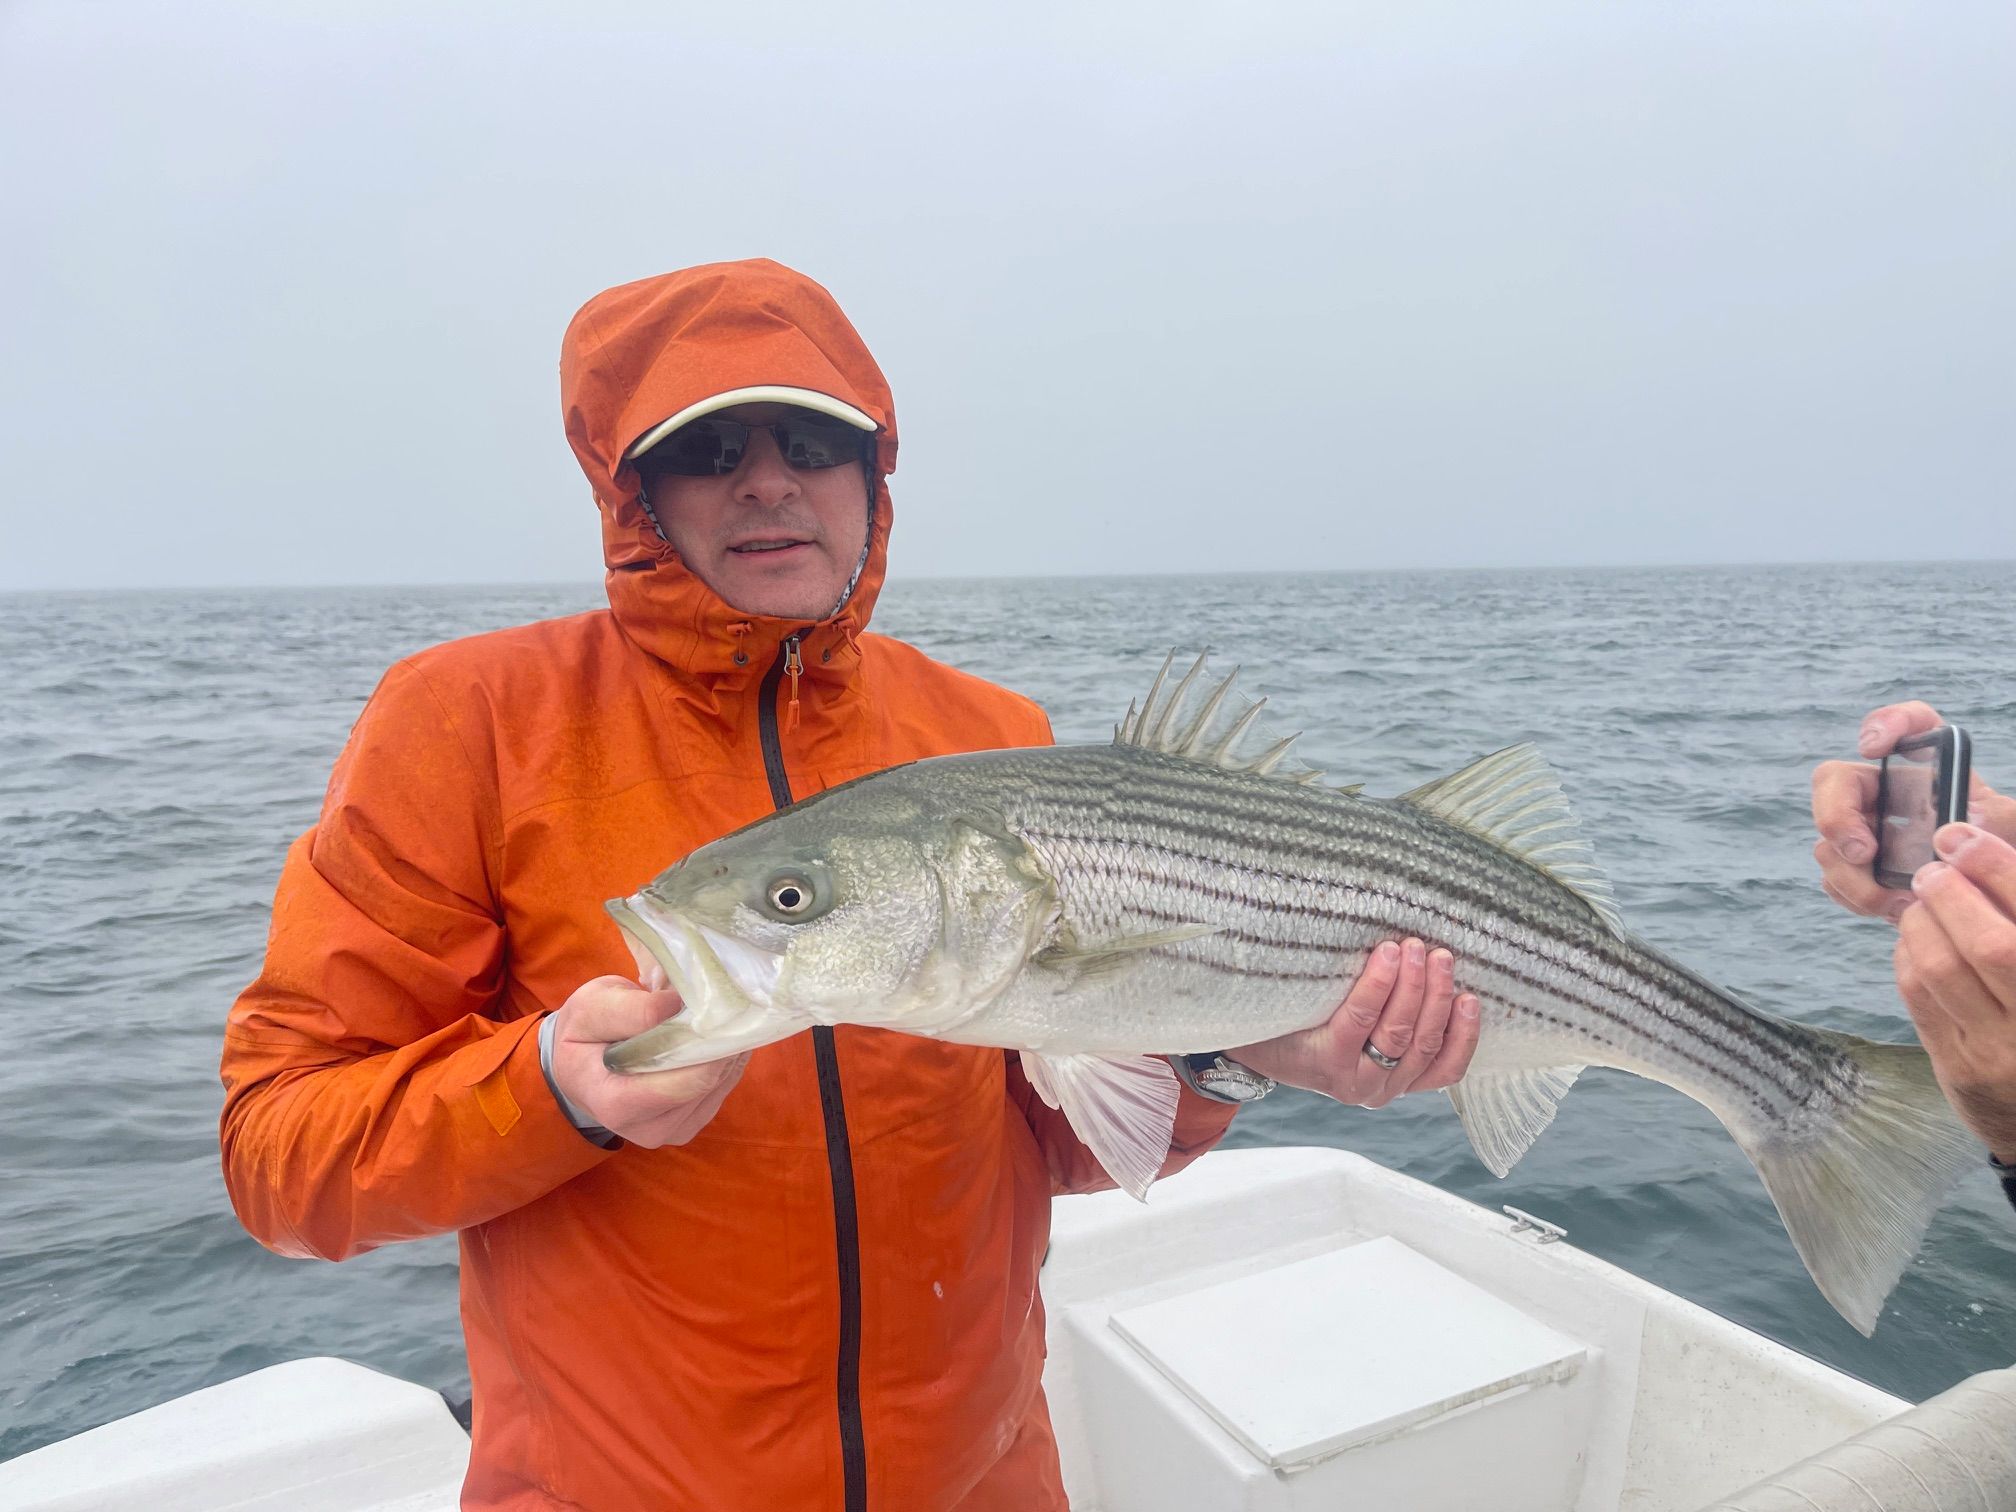 Sylvestre Outdoors LLC Saltwater boat trip (half day / 4 hours) (Brewster Flats or Monomoy Shoals, Cape Cod) fishing Offshore